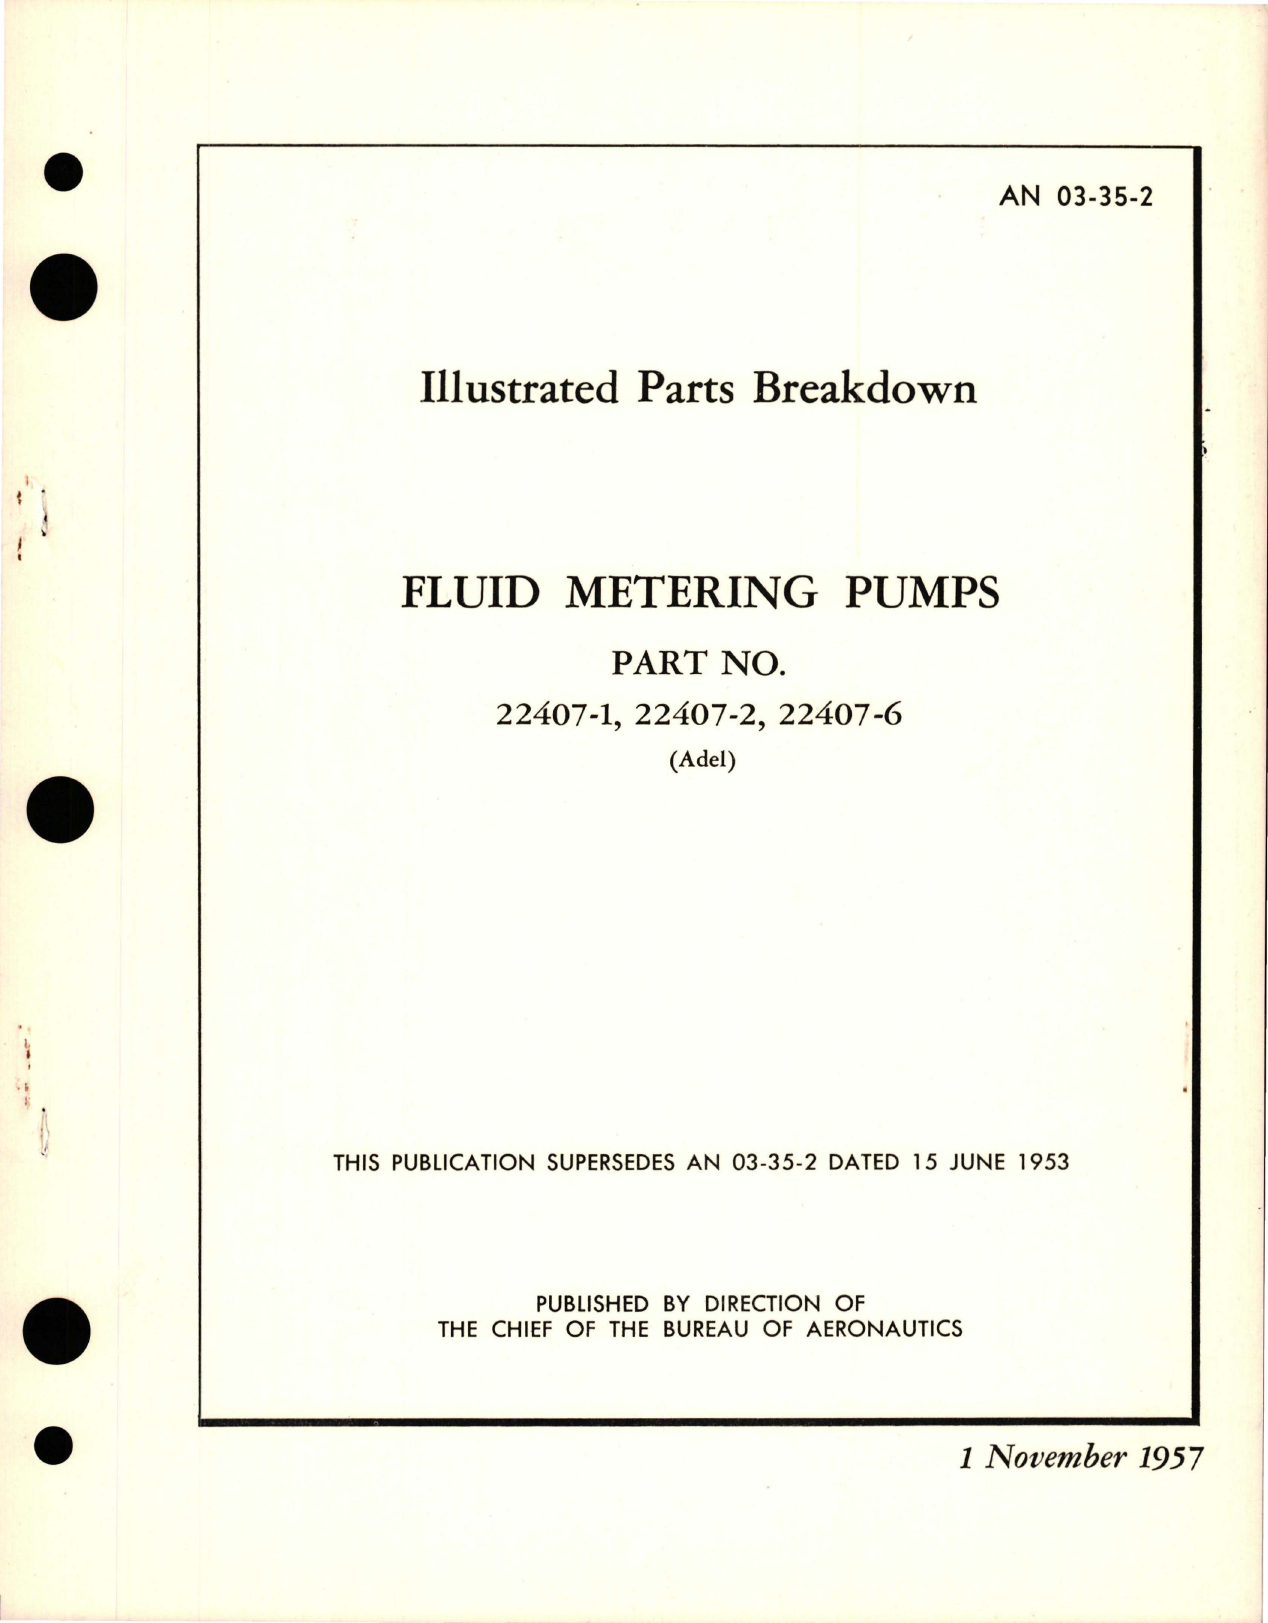 Sample page 1 from AirCorps Library document: Illustrated Parts Breakdown for Fluid Metering Pumps - Part 22407-1, 22407-2, and 22407-6 